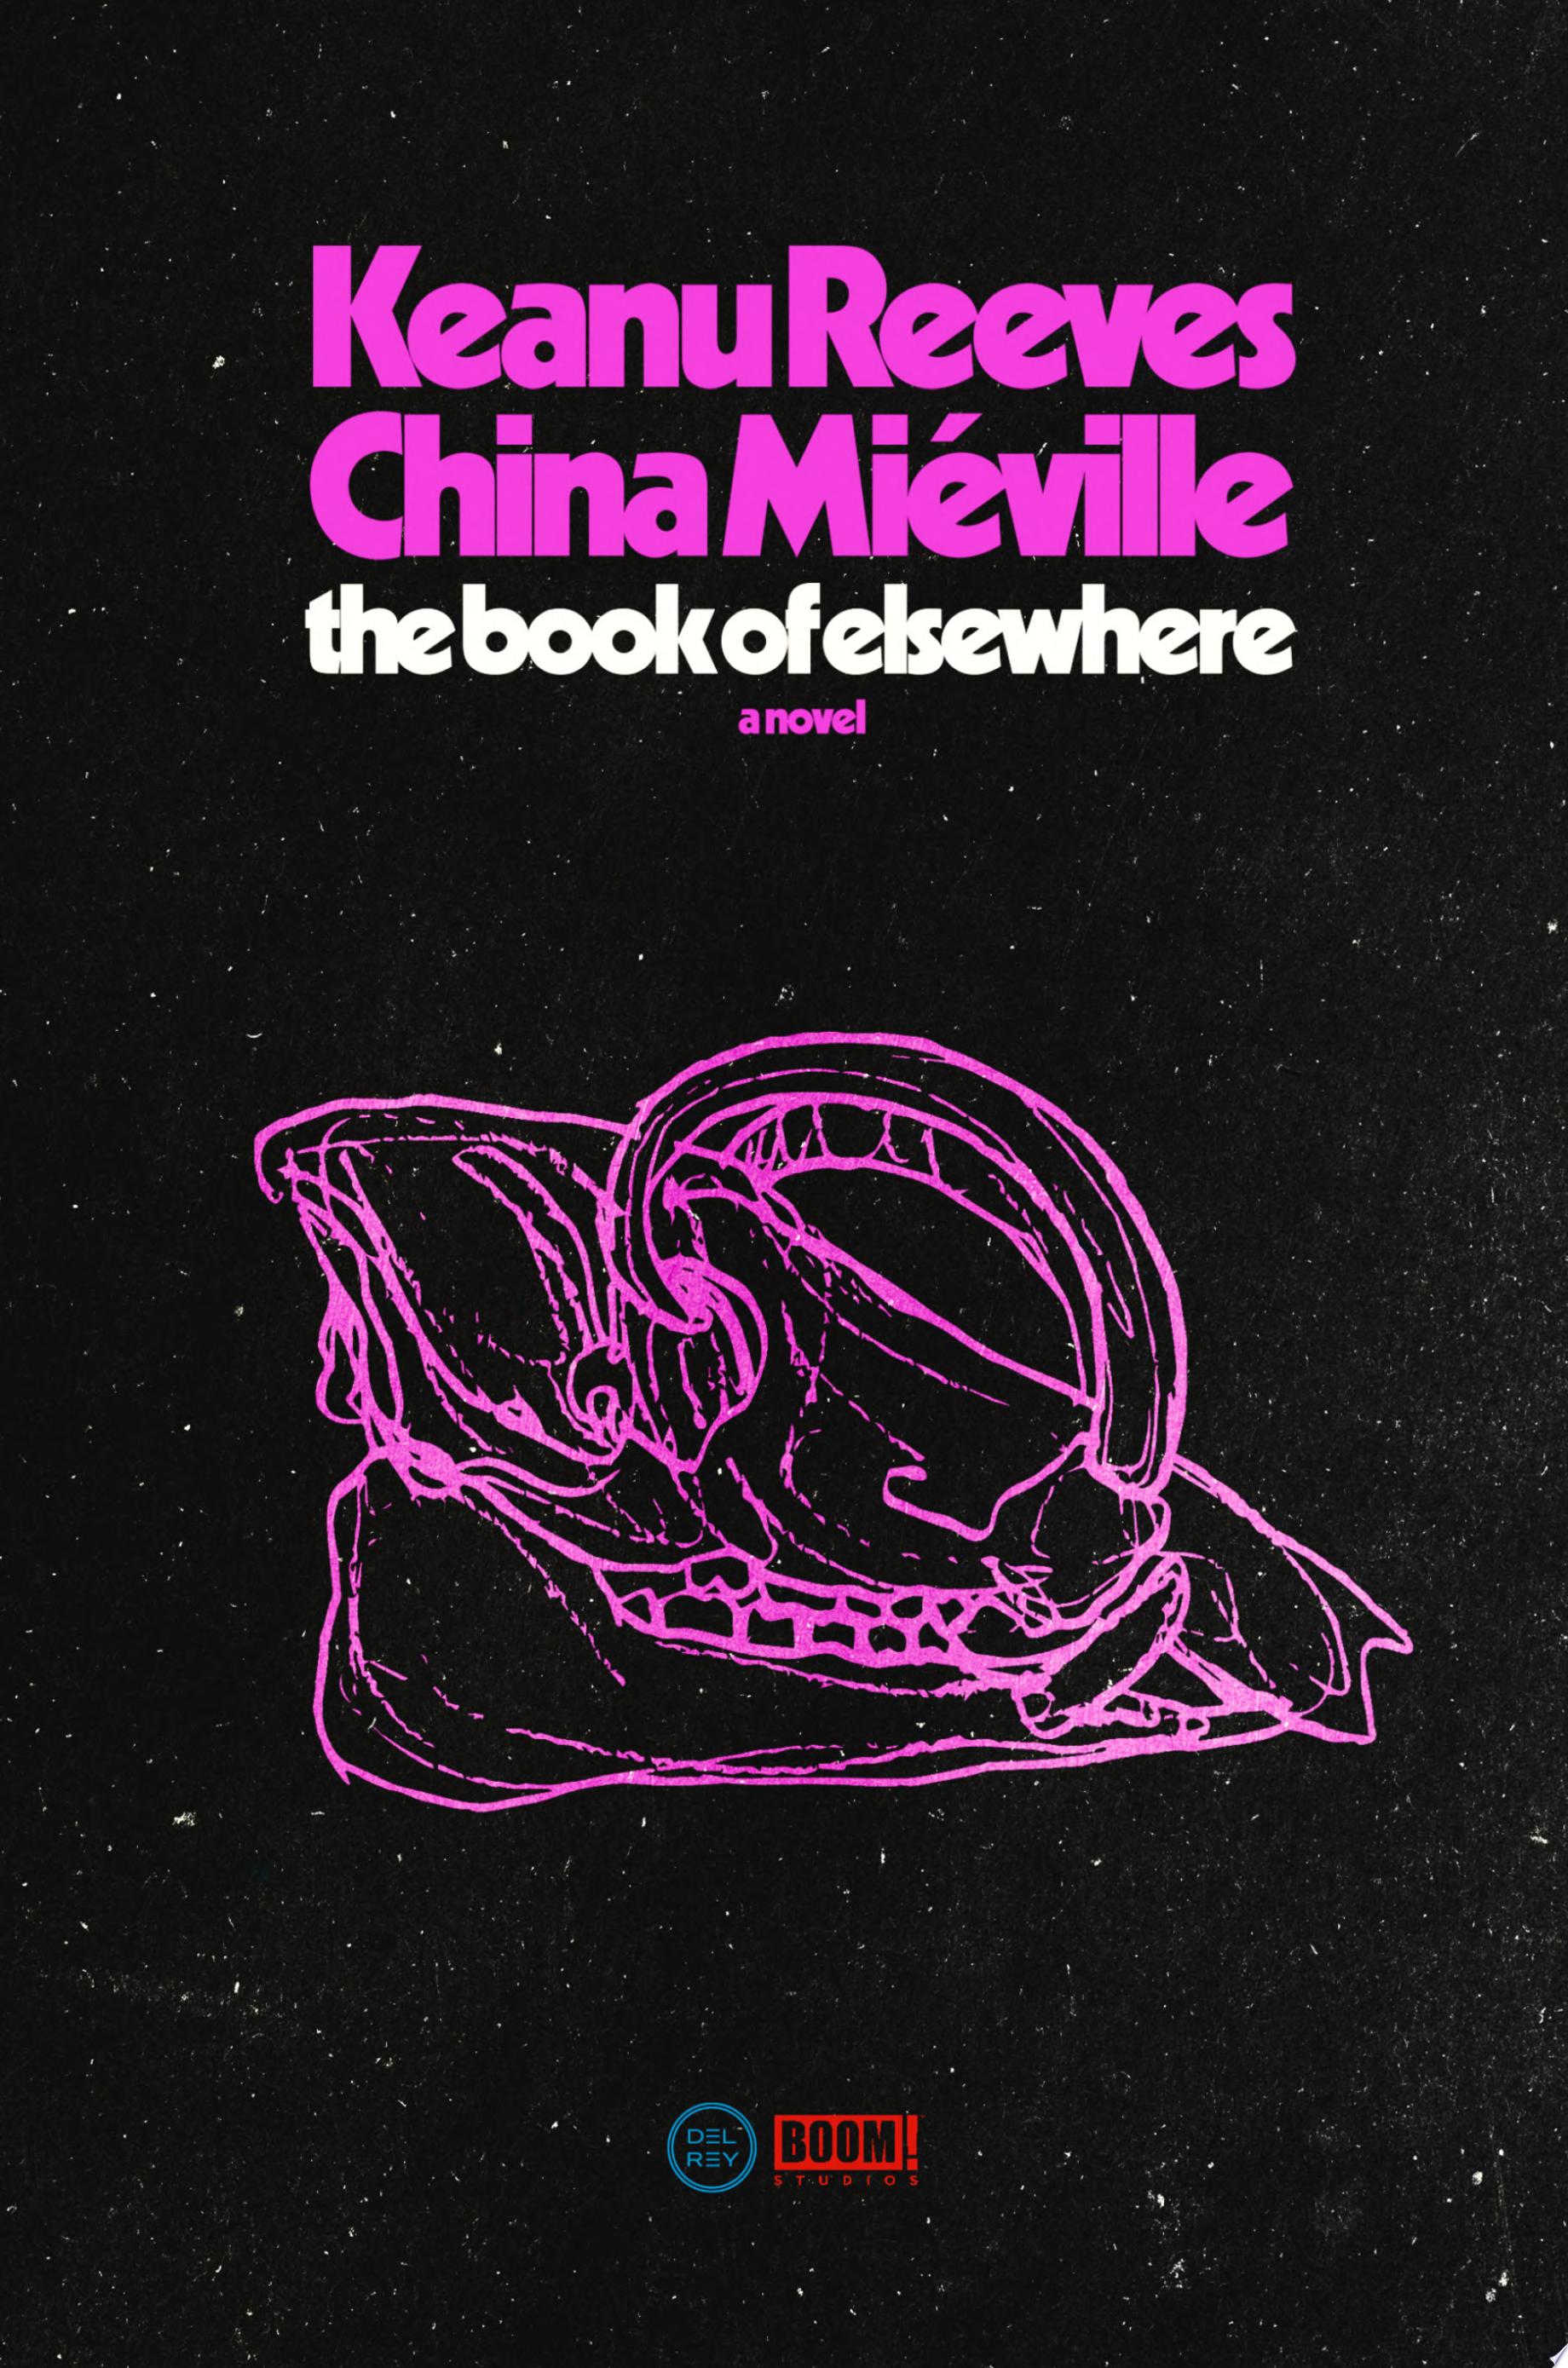 Image for "The Book of Elsewhere" by Keanu Reeves and China Miéville